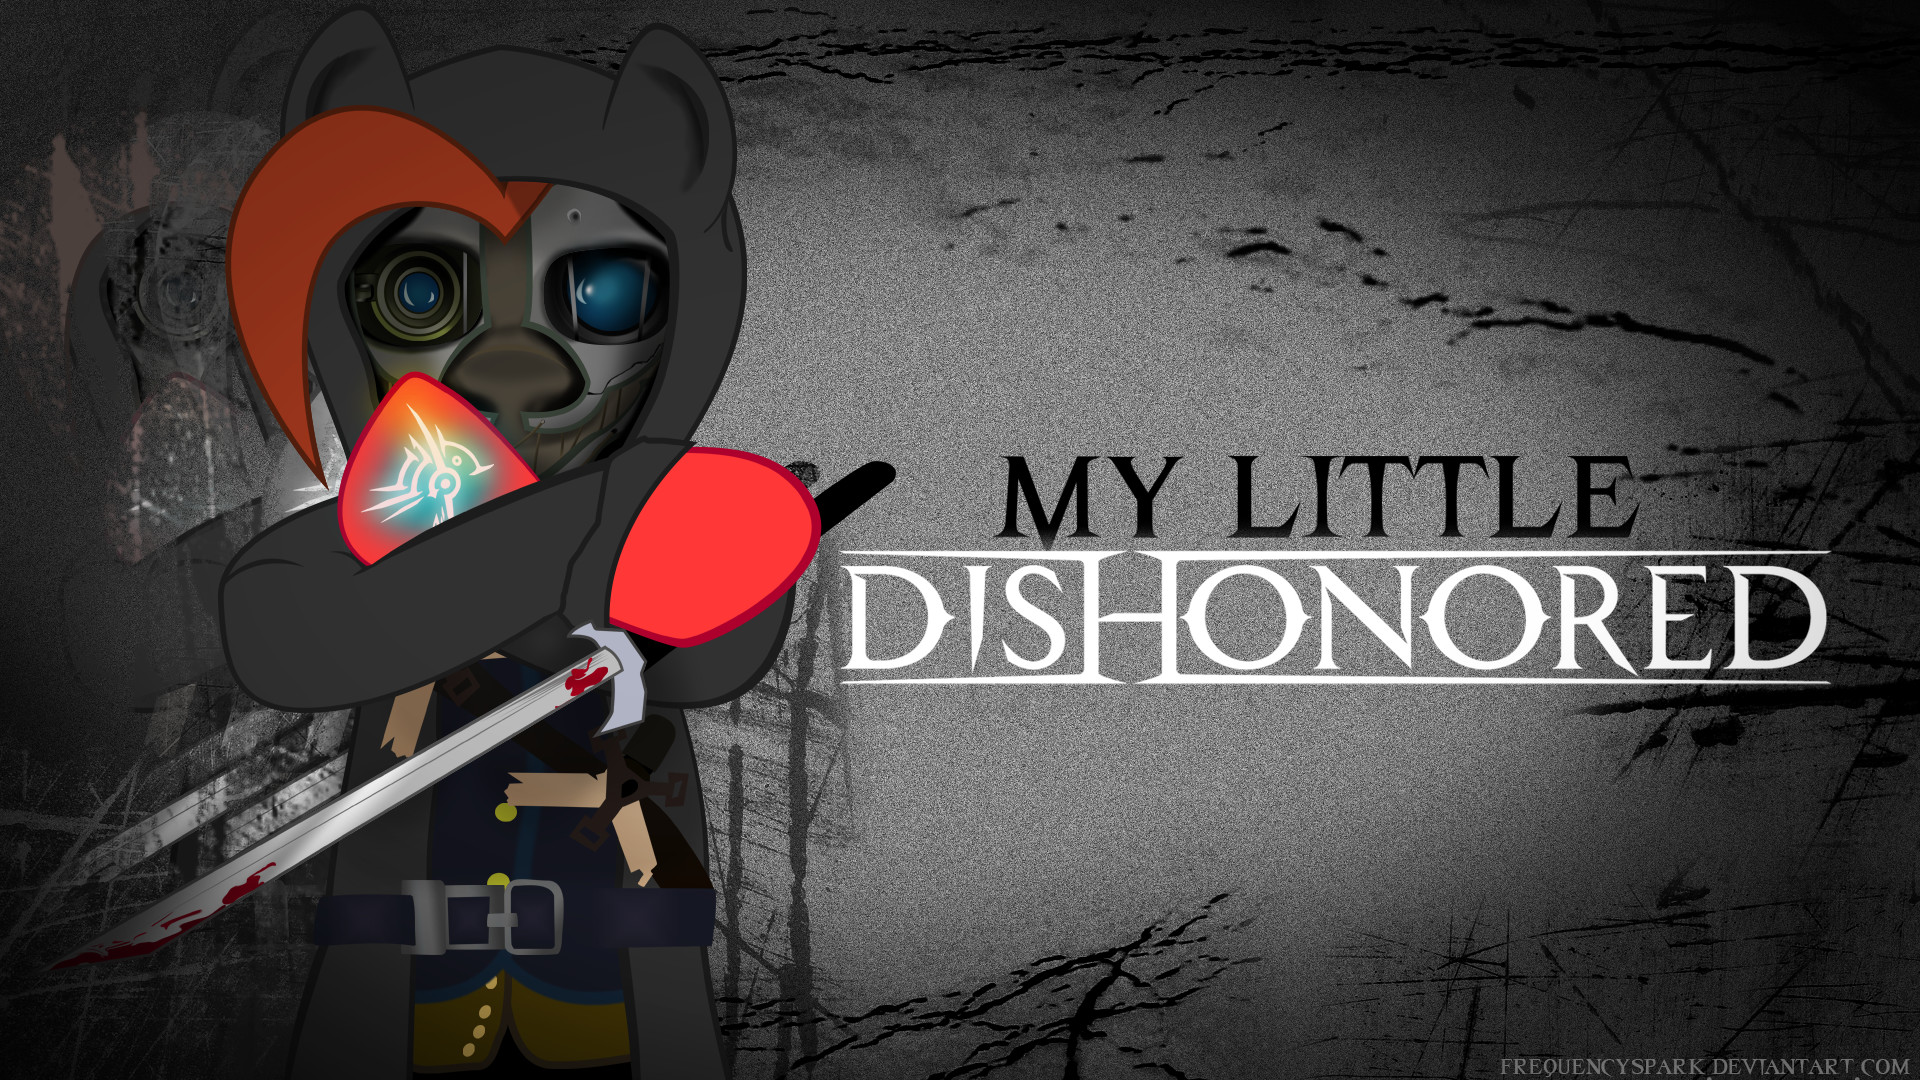 1920x1080 ... My Little Pony Dishonored Wallpaper by Sparxyz